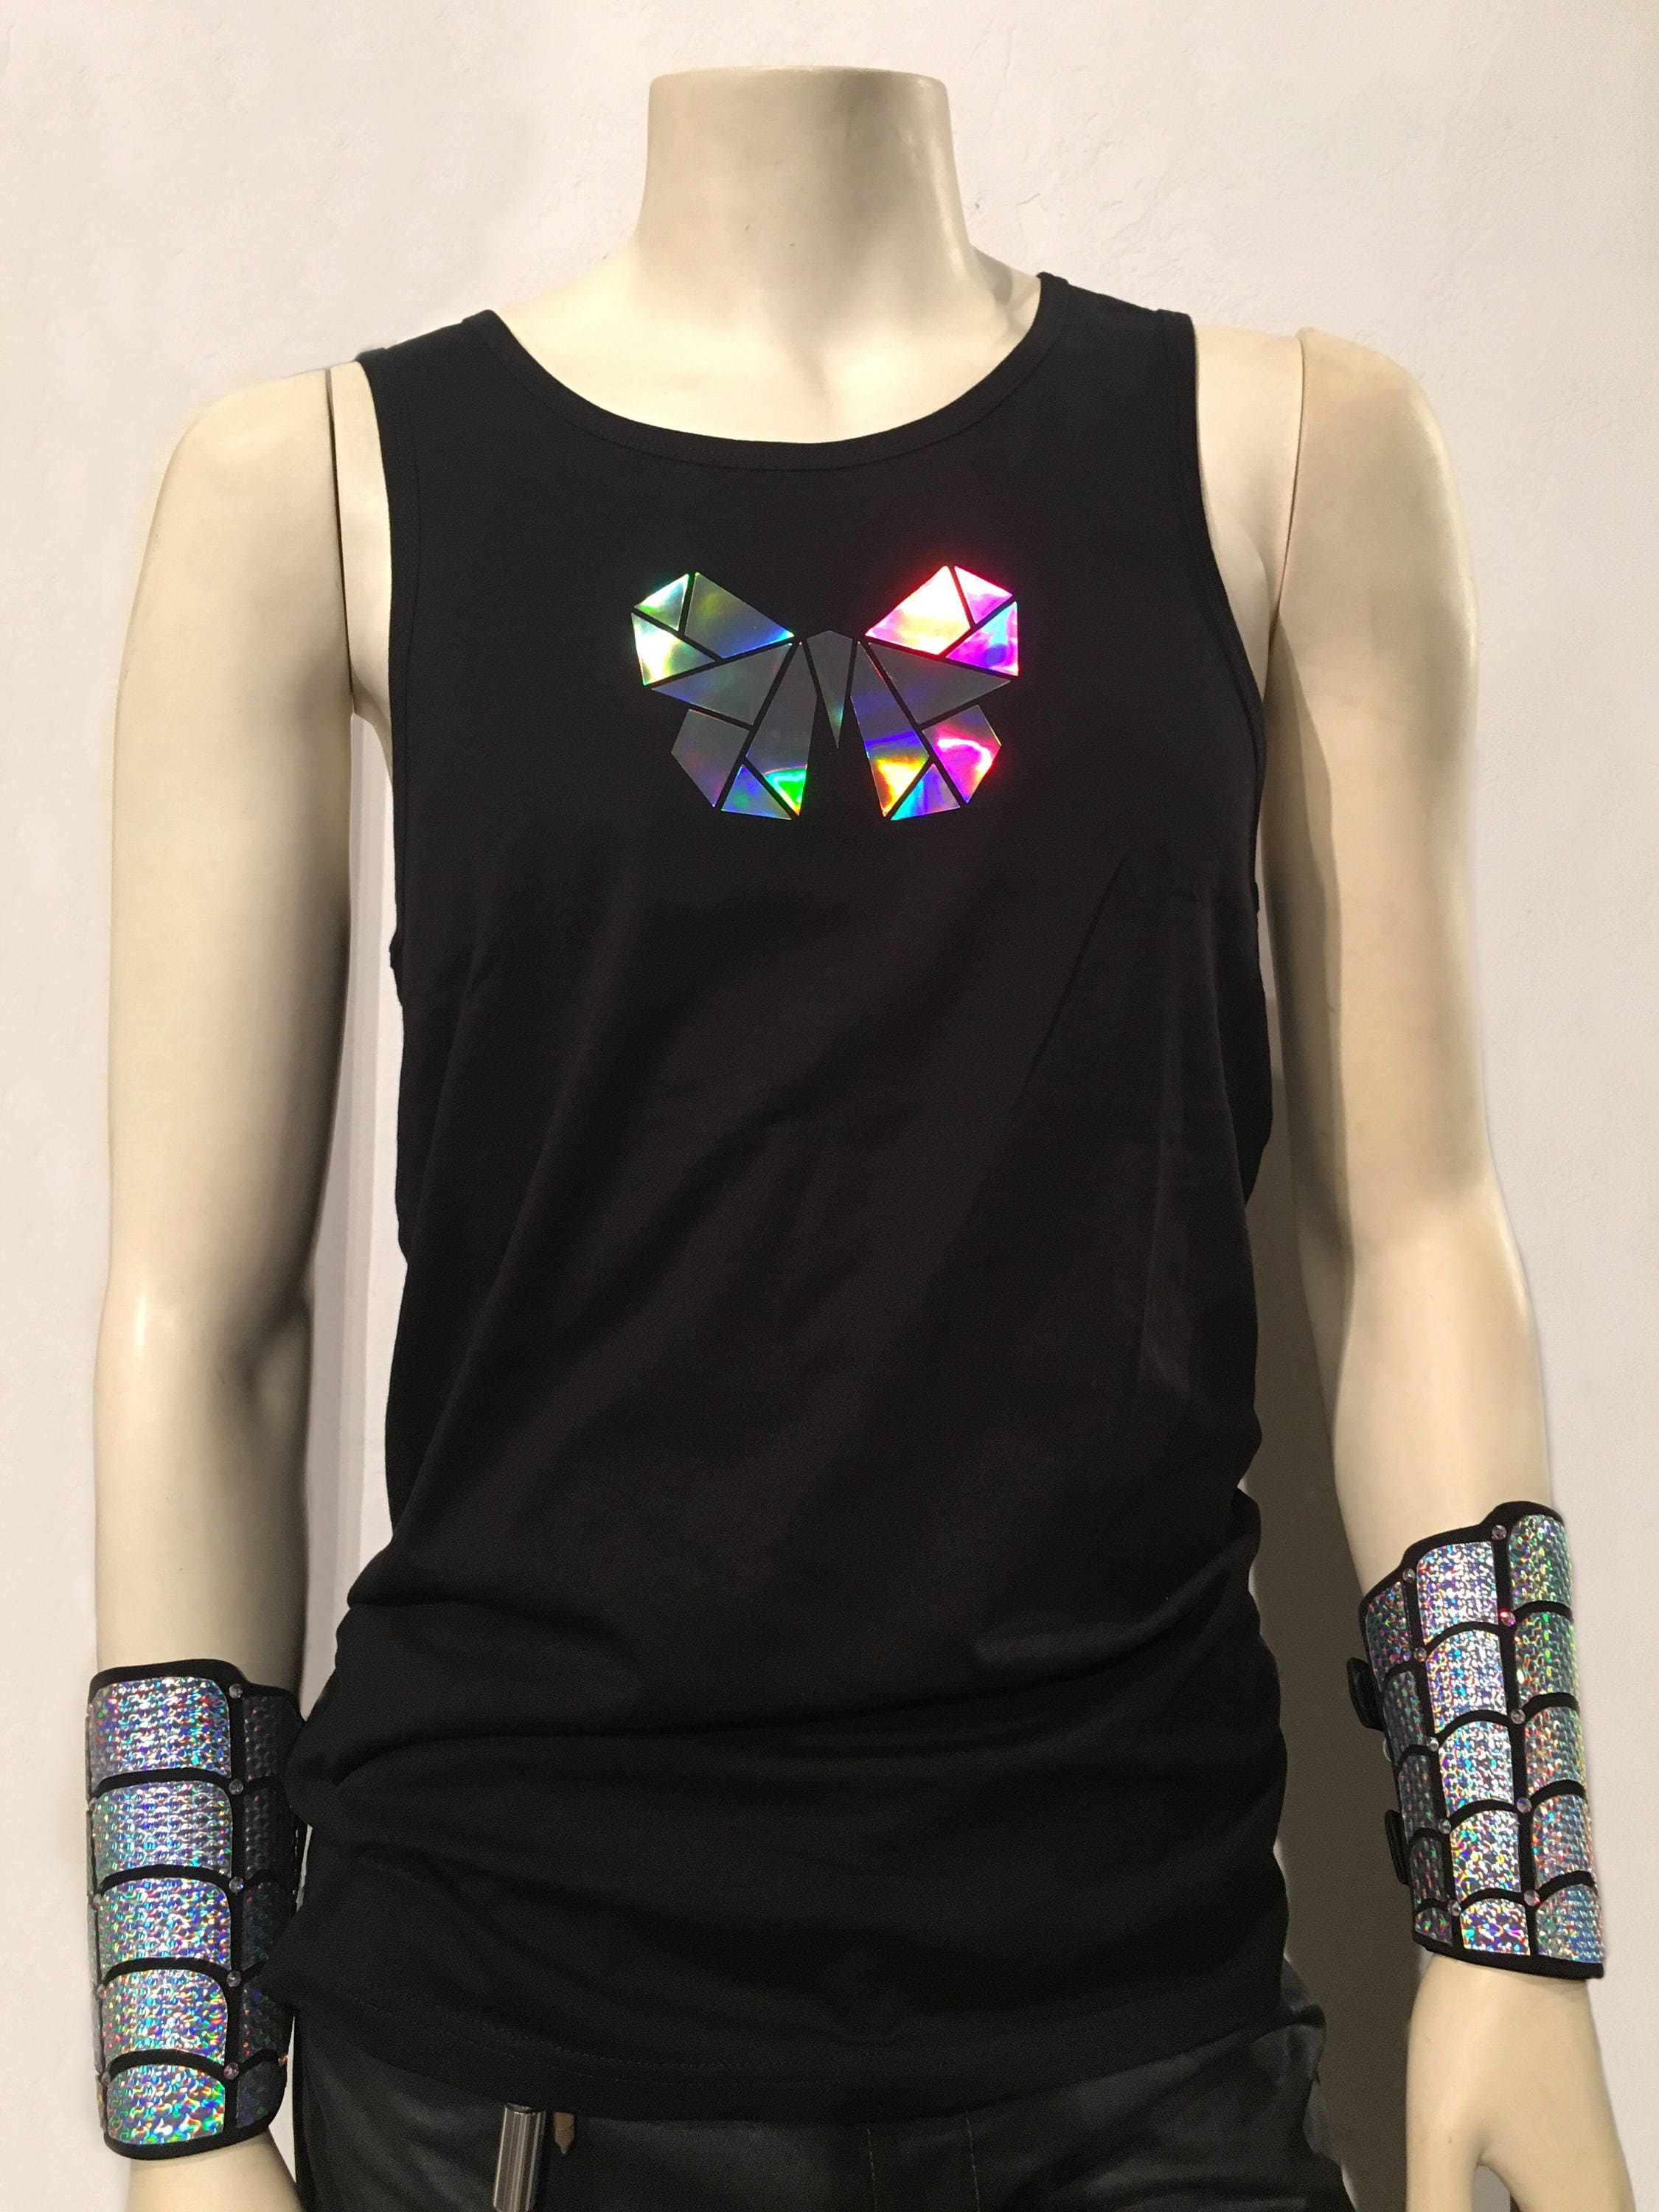 Shine Bright Because You are Beautiful Sleeveless Vest T-Shirt Fit Mens 